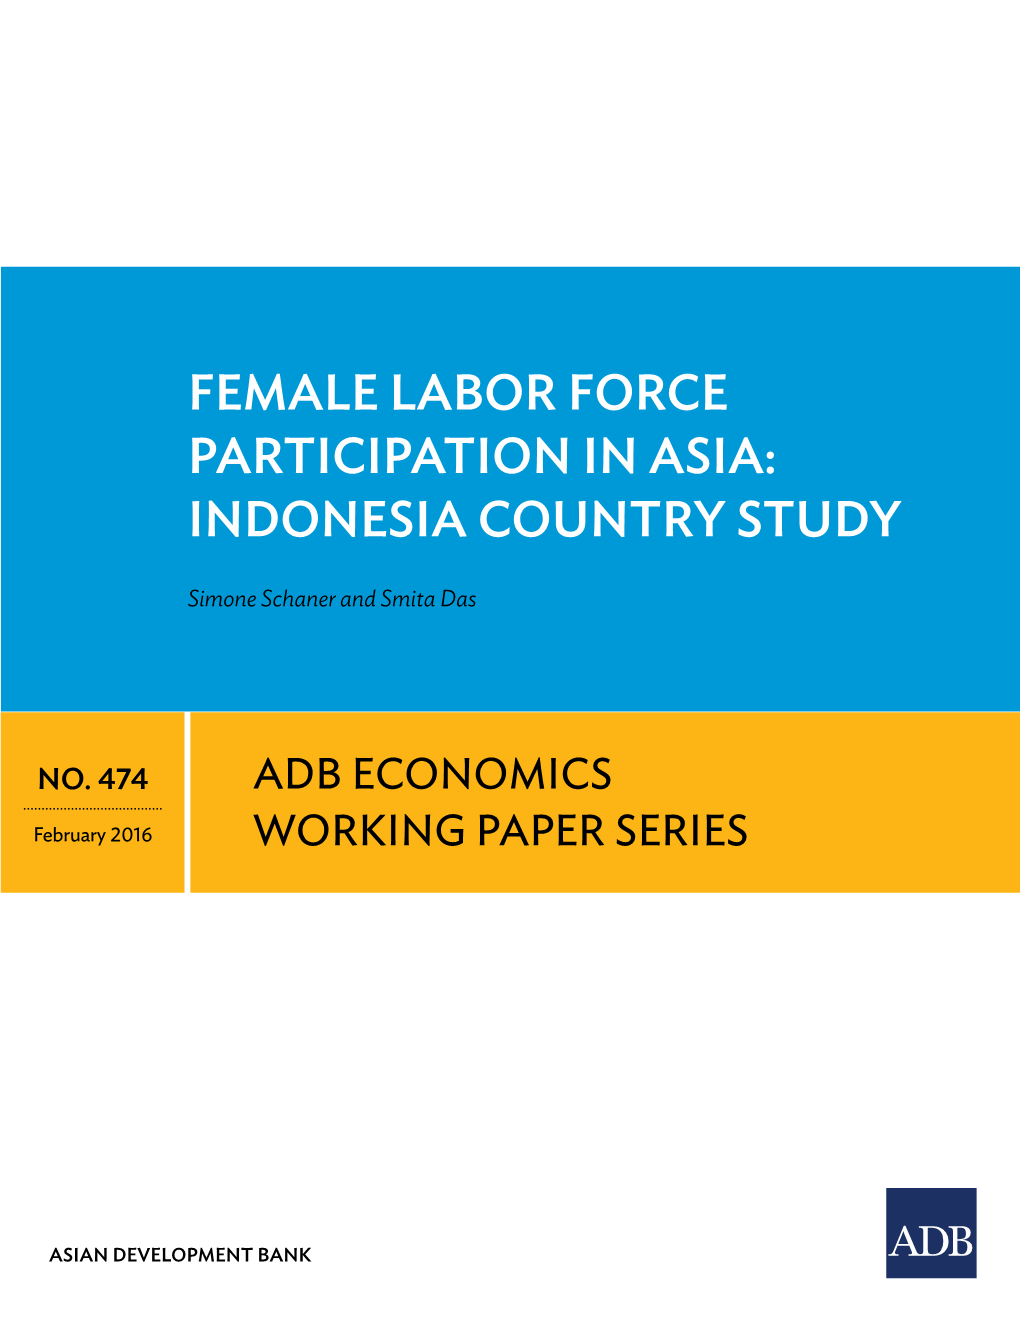 Female Labor Force Participation in Asia: Indonesia Country Study